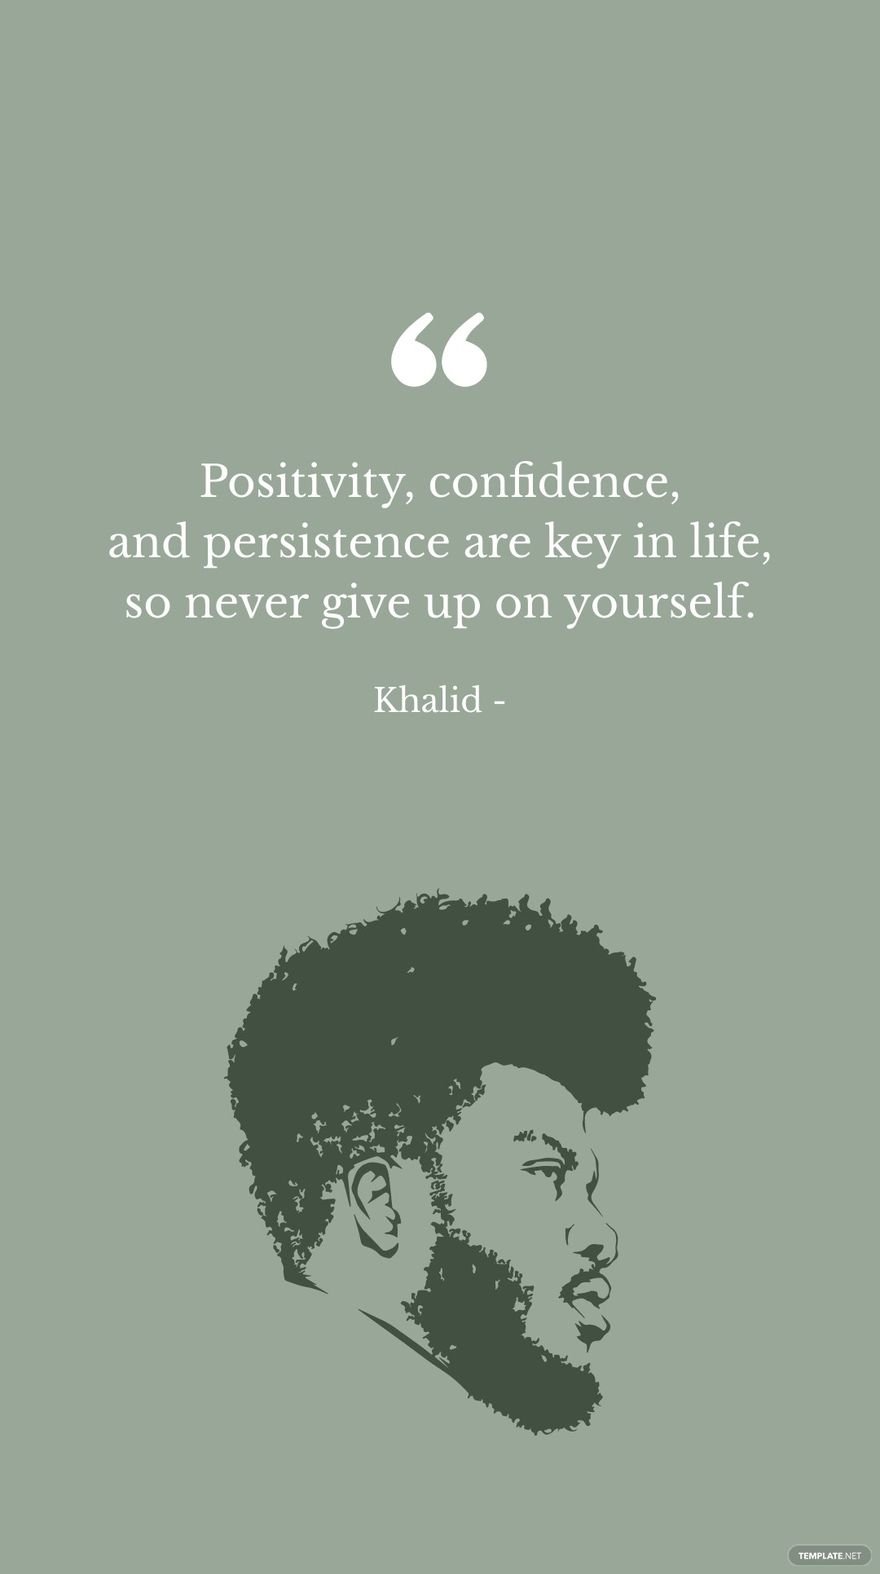 Free Khalid - Positivity, confidence, and persistence are key in life, so never give up on yourself. in JPG